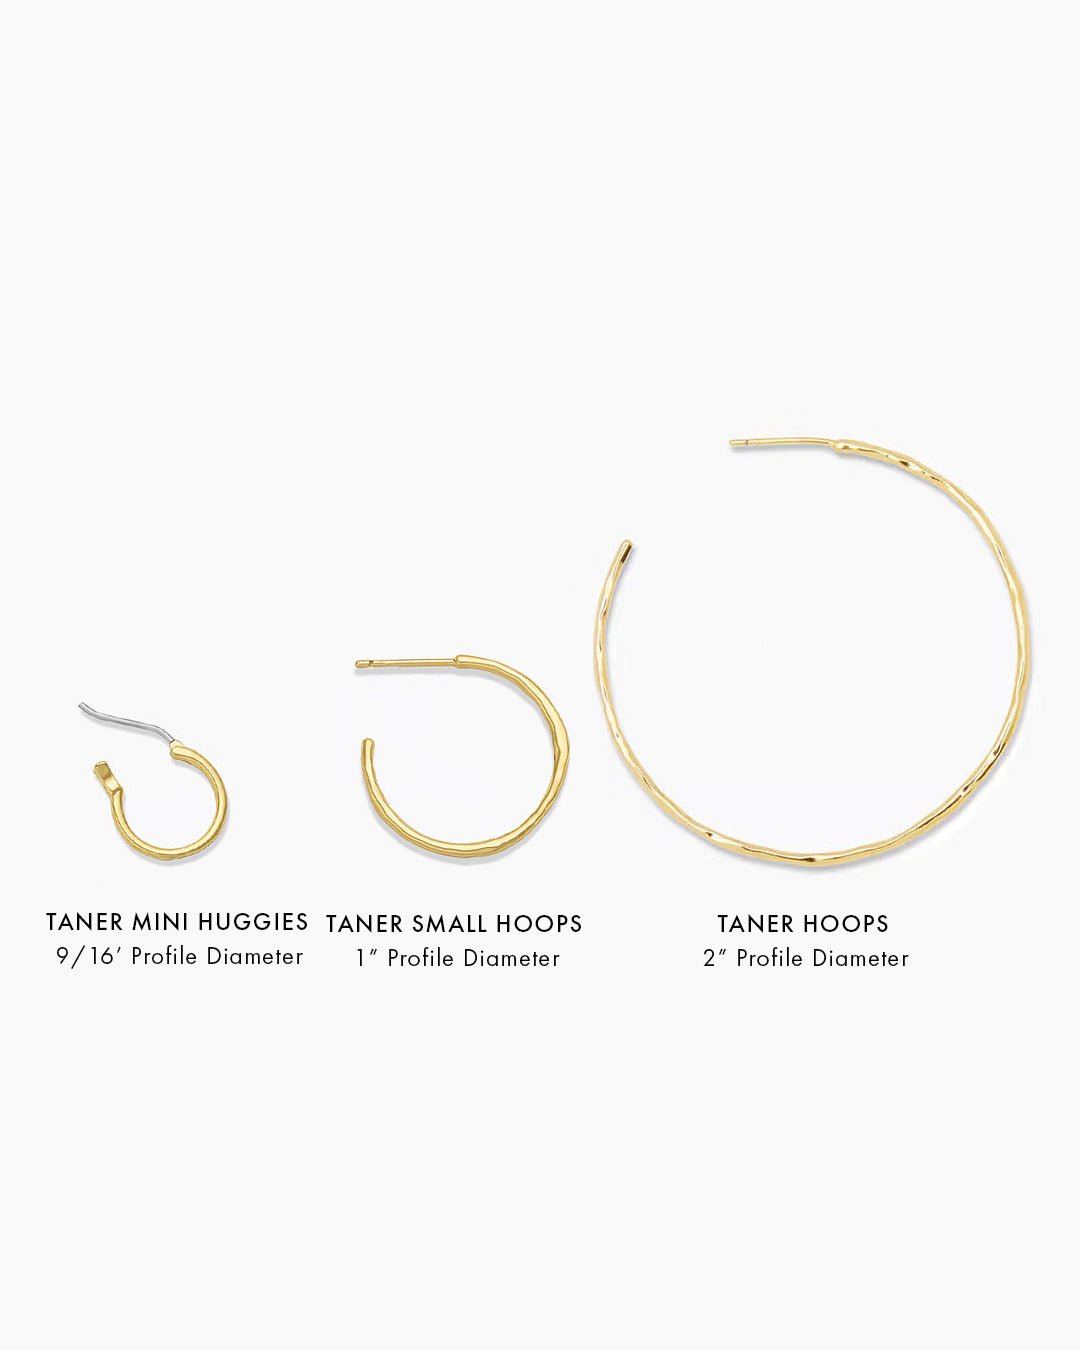 Taner Thin hoops, medium sized hoops || option::Gold Plated